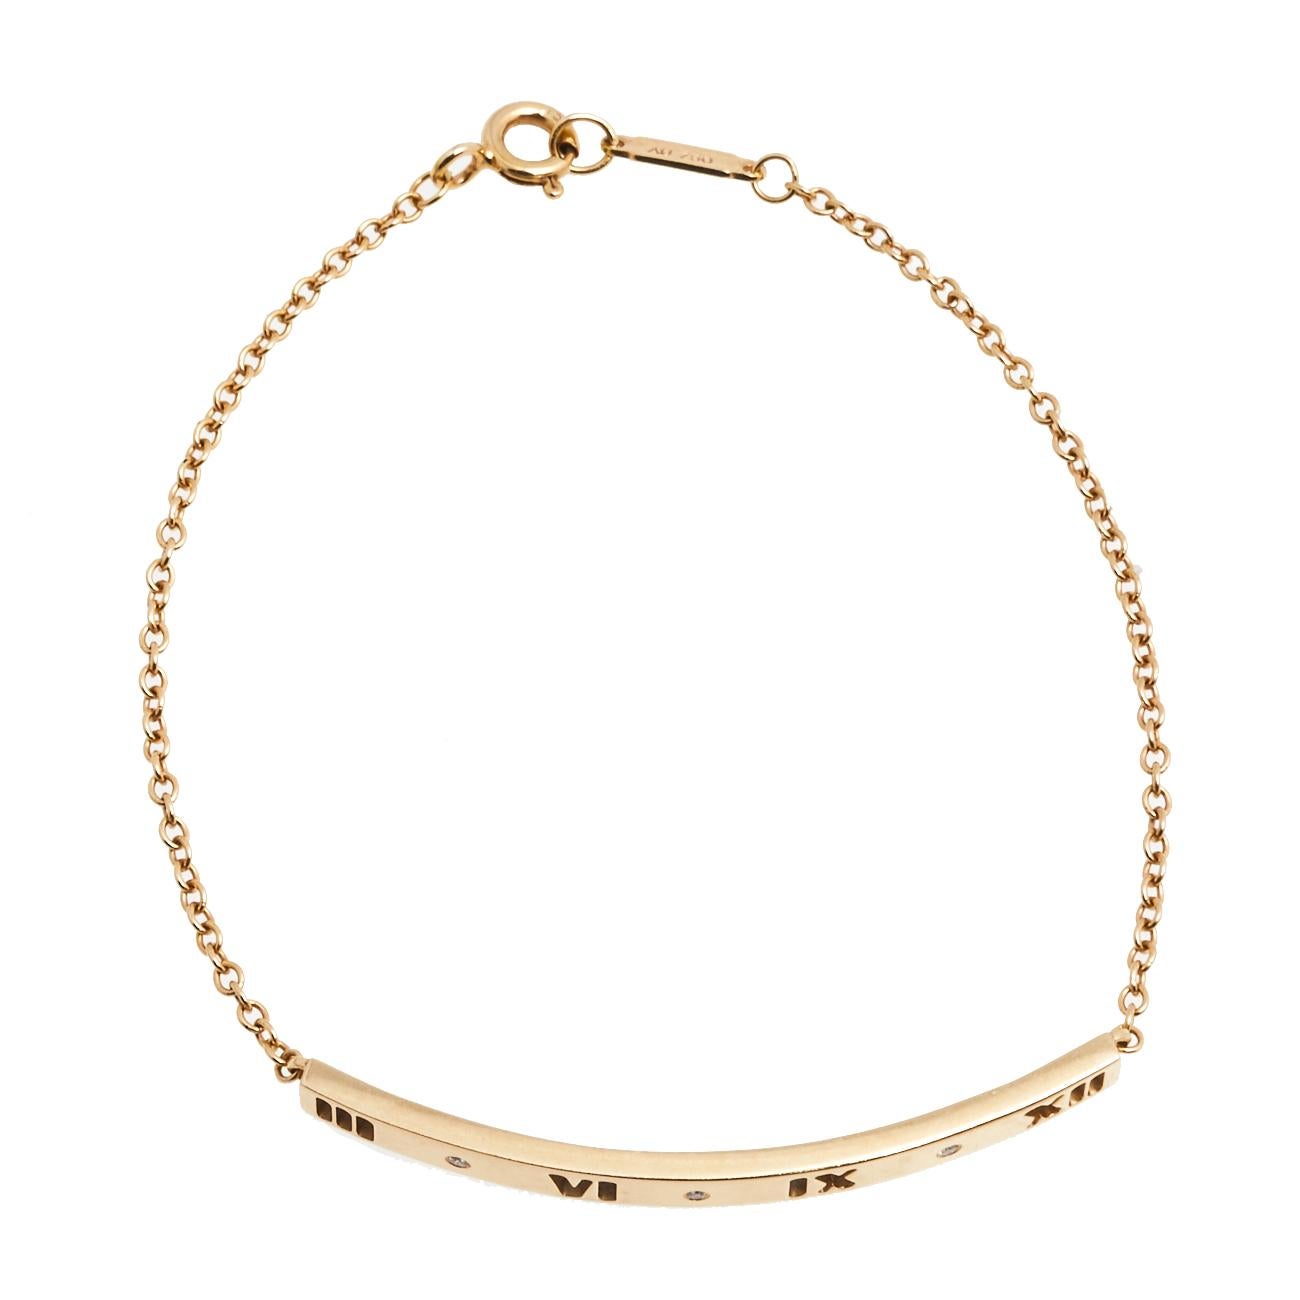 Gift your loved one this delicate-looking Tiffany & Co. Atlas bracelet. Made from 18K yellow gold, it features diamonds on the front plaque along with signature cutout Roman numerals. It is held by a chainlink and has a spring lock closure.

